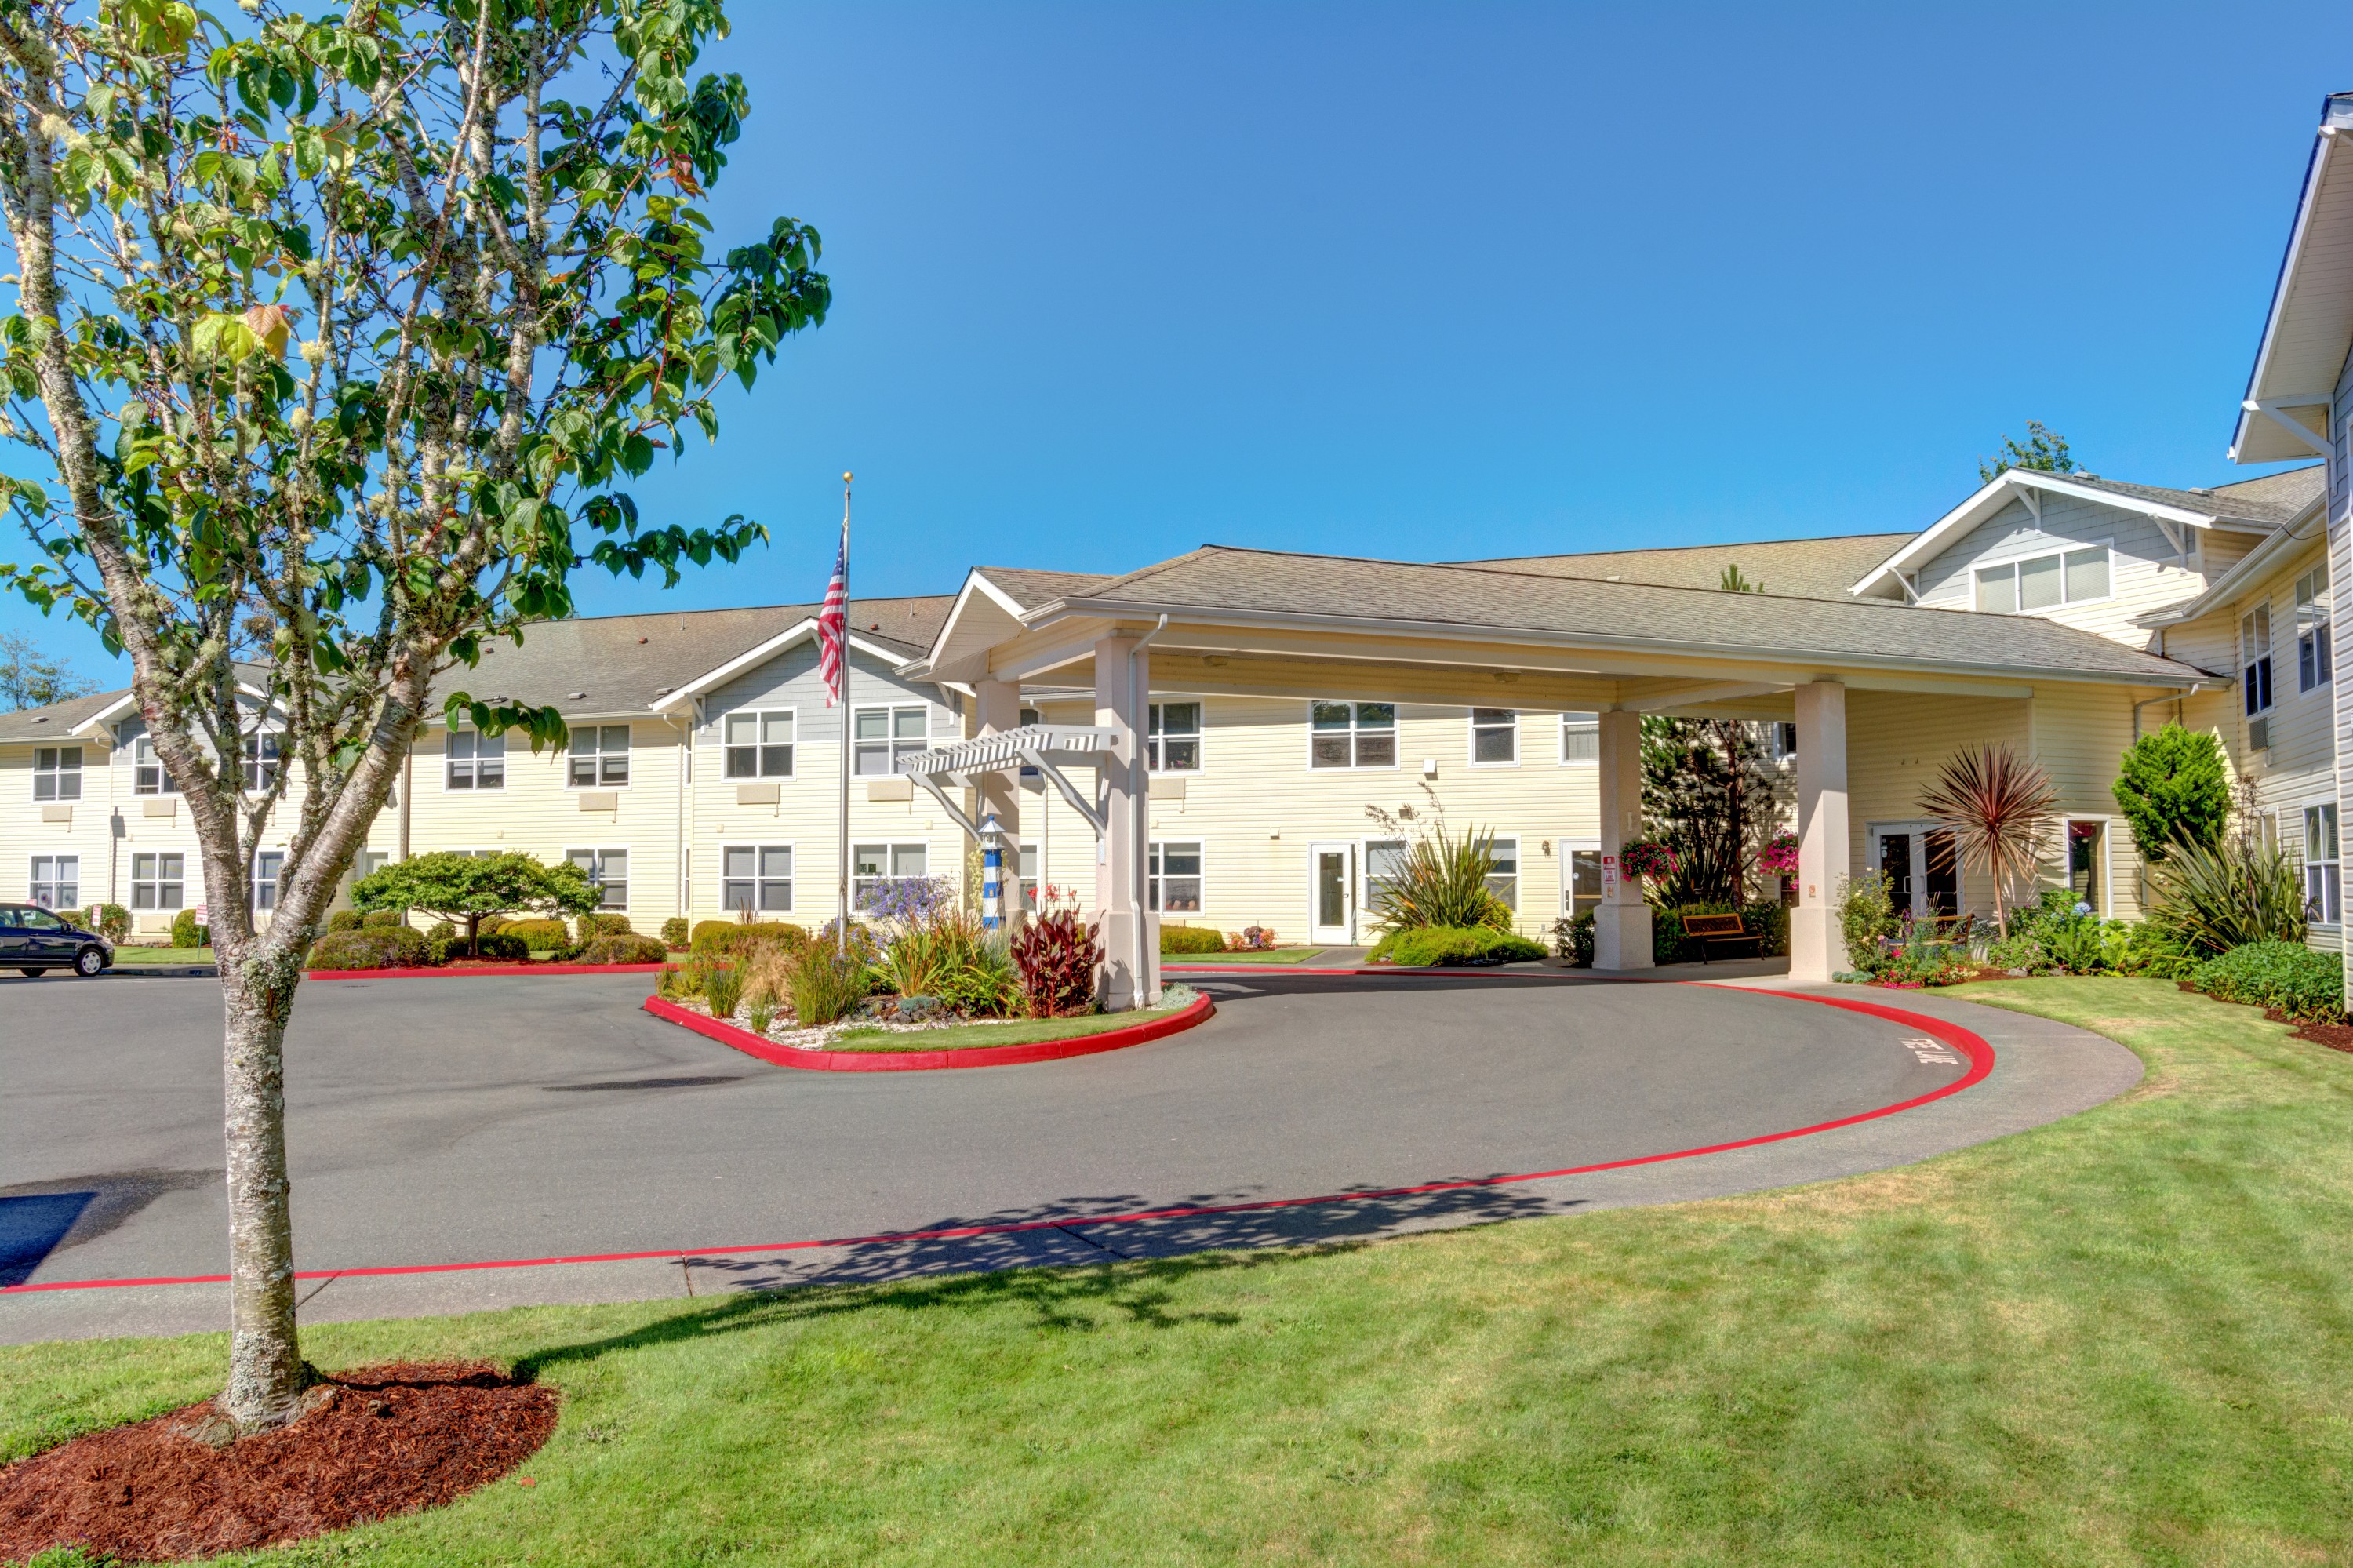 Image 3 | Bayside Terrace Assisted Living & Memory Care